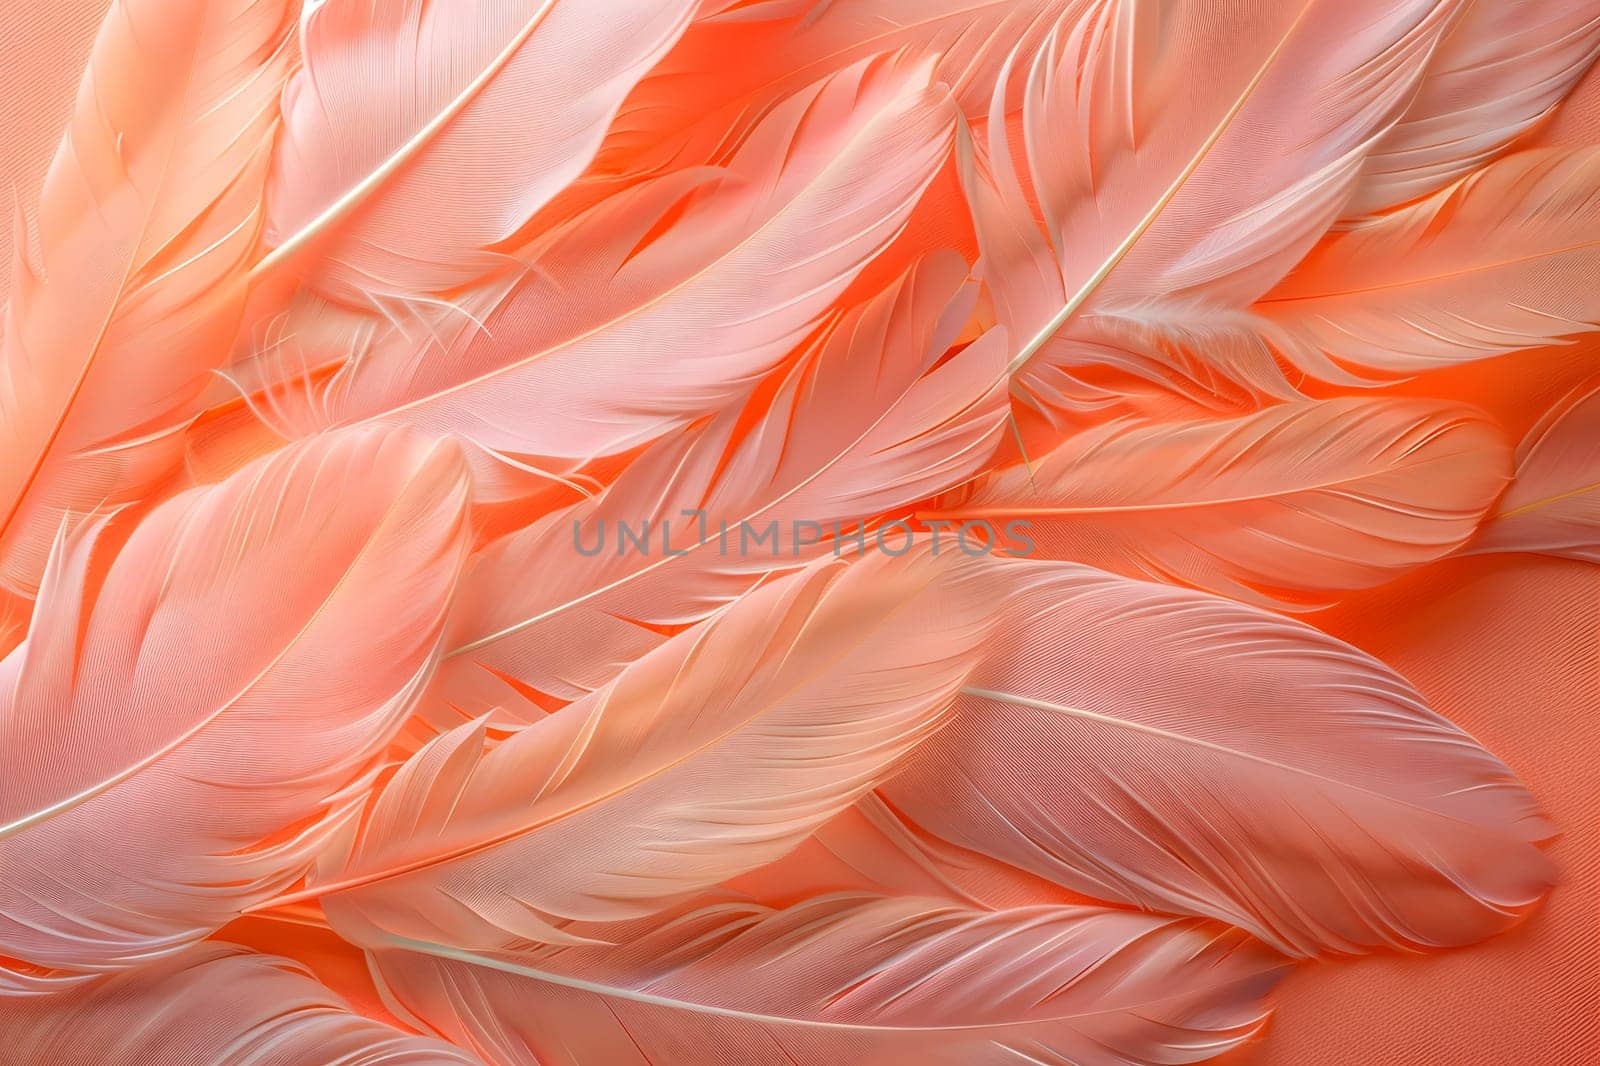 A closeup of a heap of peachcolored feathers on a peach background, made of natural material. The transparency of the feathers adds a fashion accessory vibe, perfect for an event